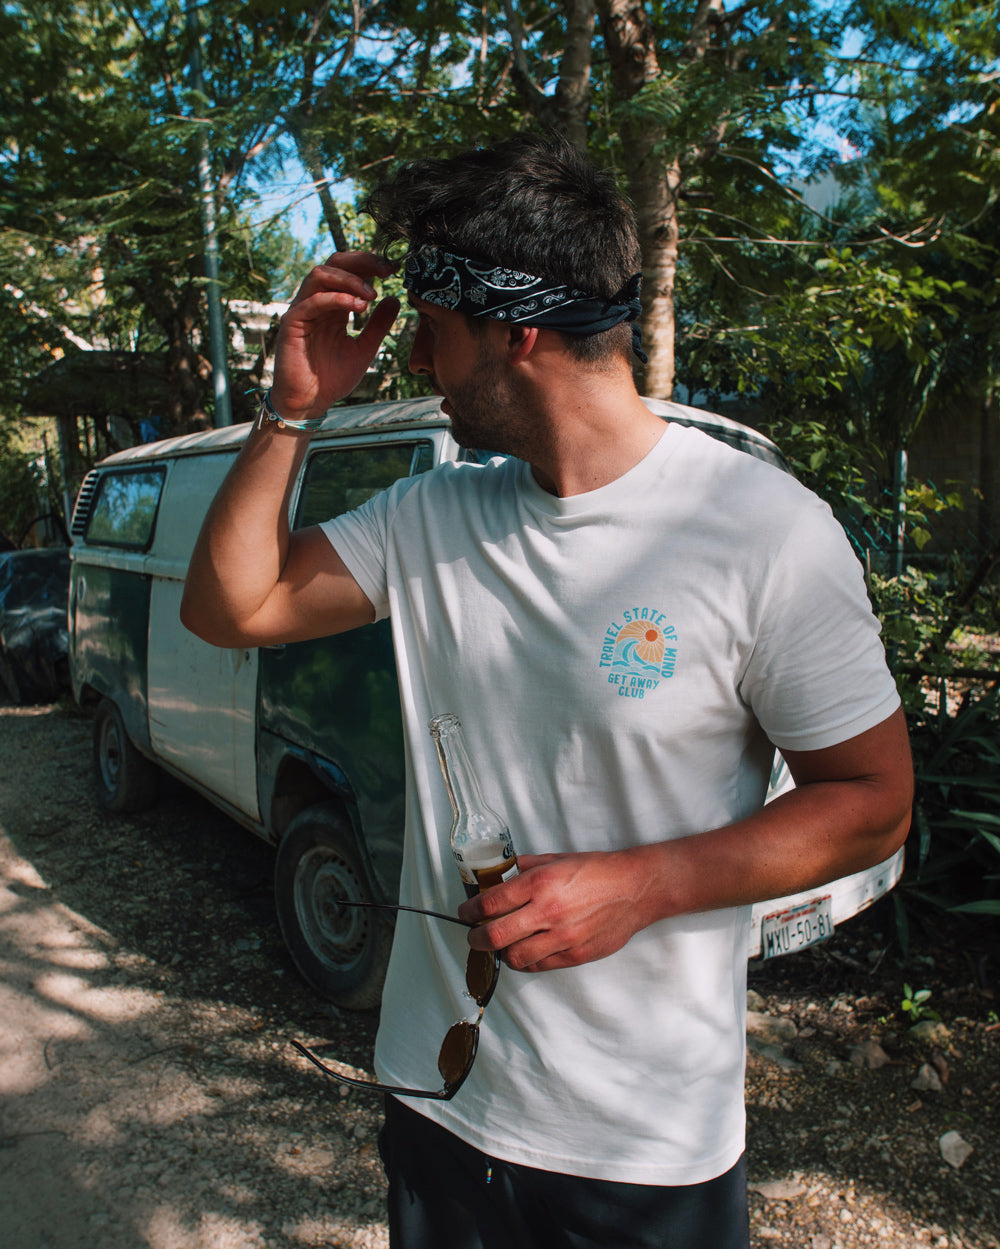 Travel State of Mind T-Shirt - Surf White